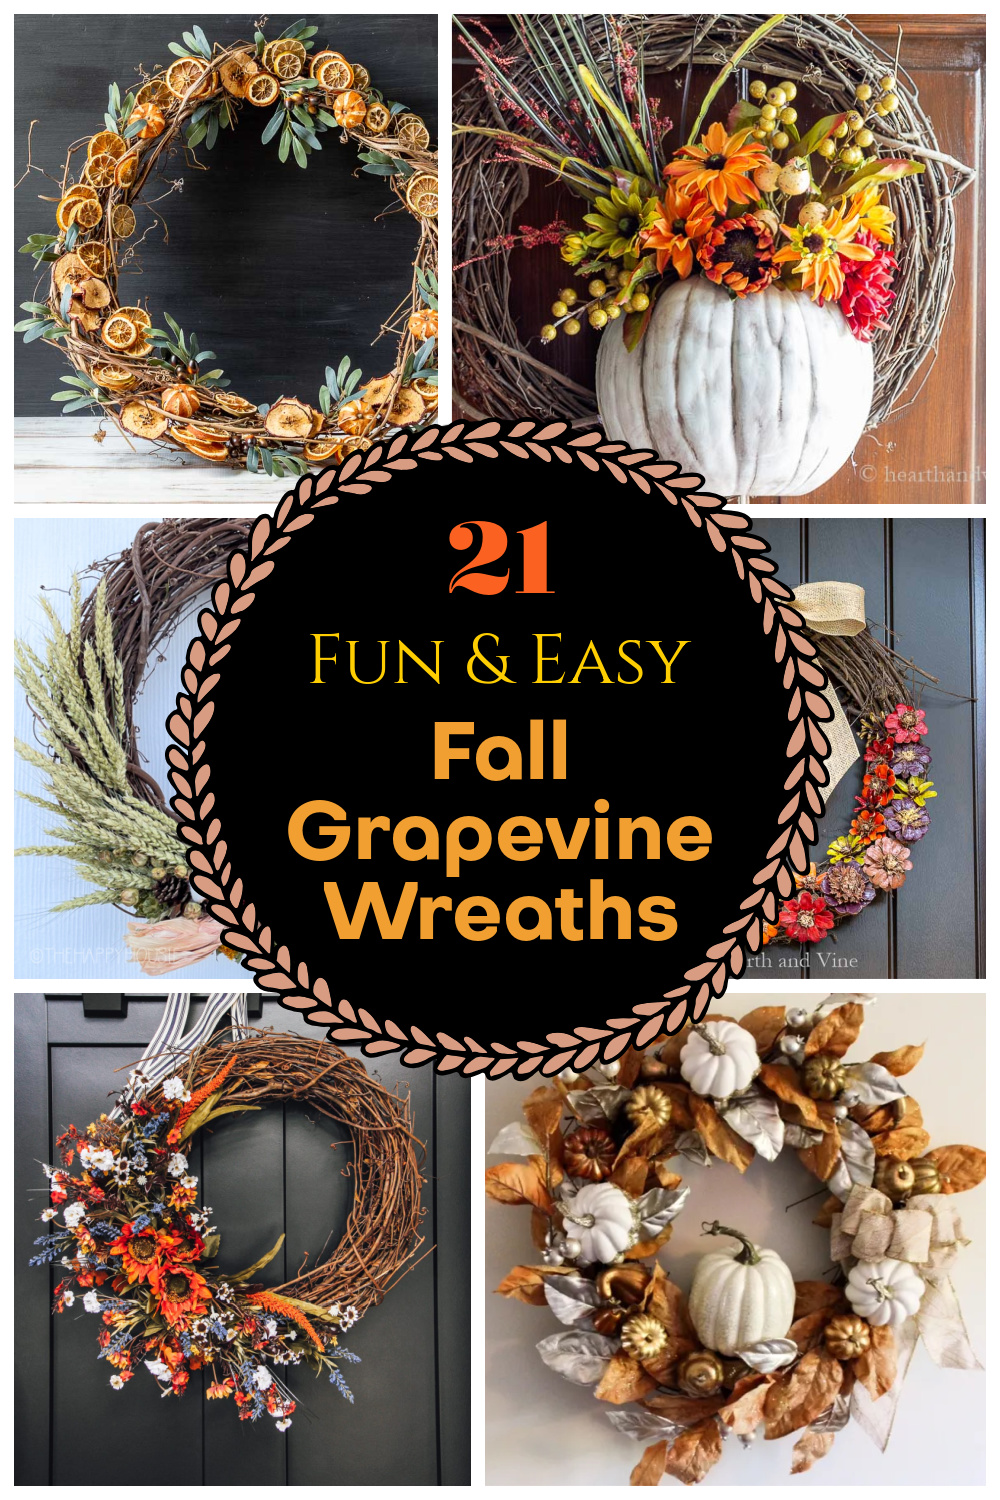 Six fall grapevine based wreaths in a collage.